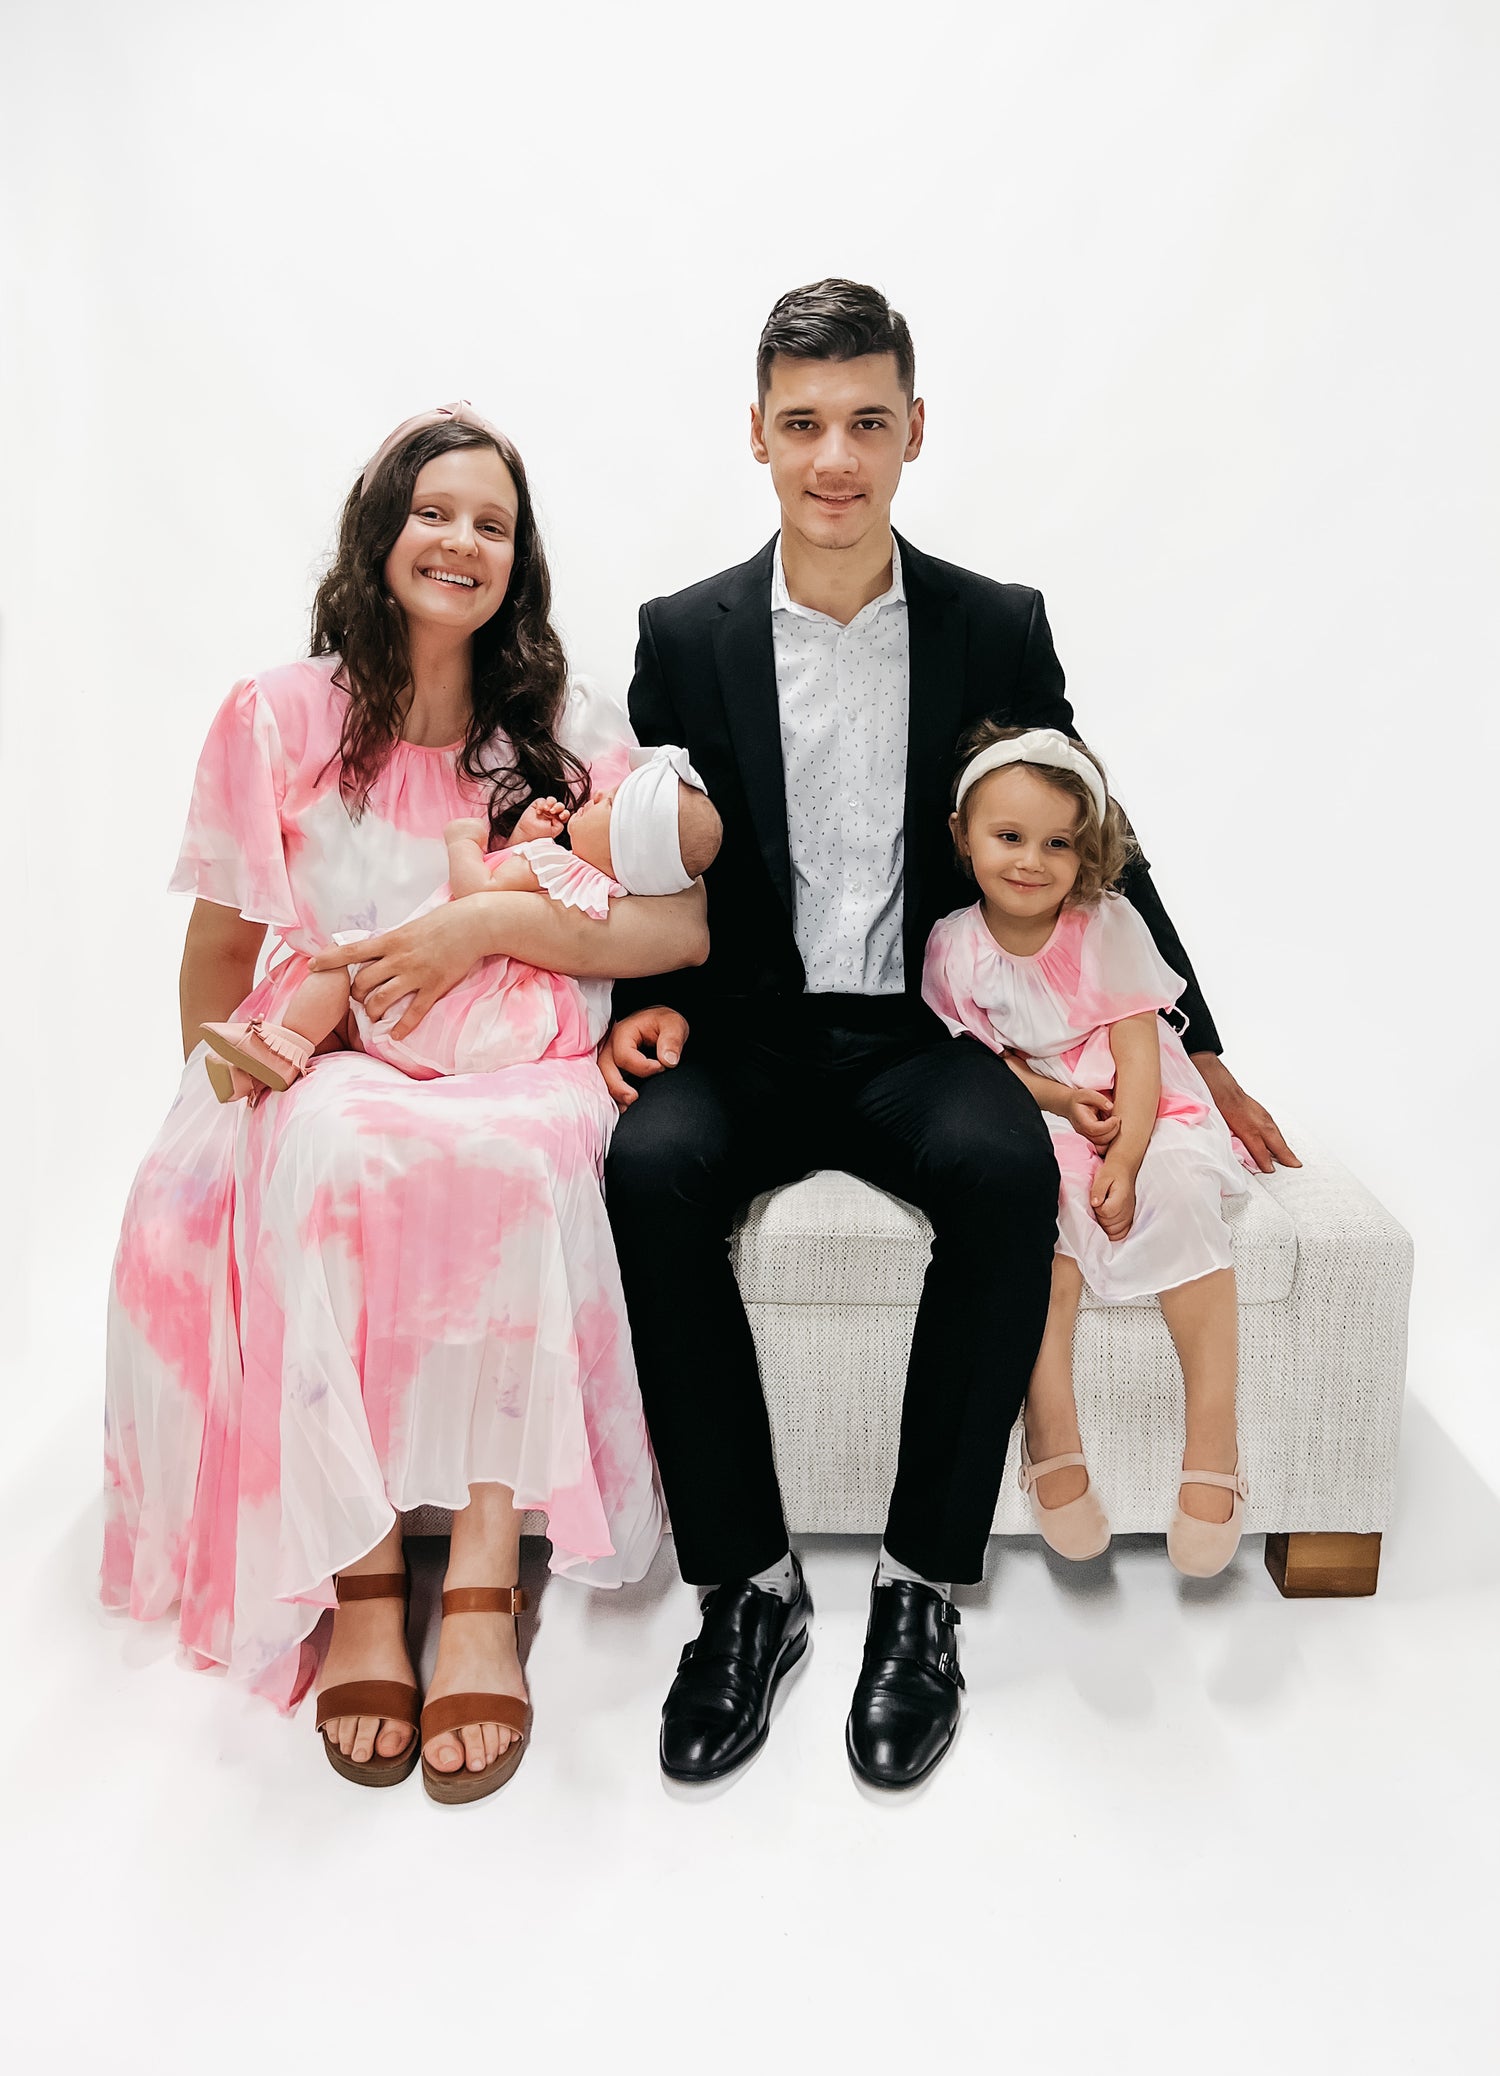 Ruth, founder of Little Mae Co sitting on a stool and holding her baby. Her husband is sitting beside her wearing a black suit and their daughter sits beside wearing a pink dress and headband.